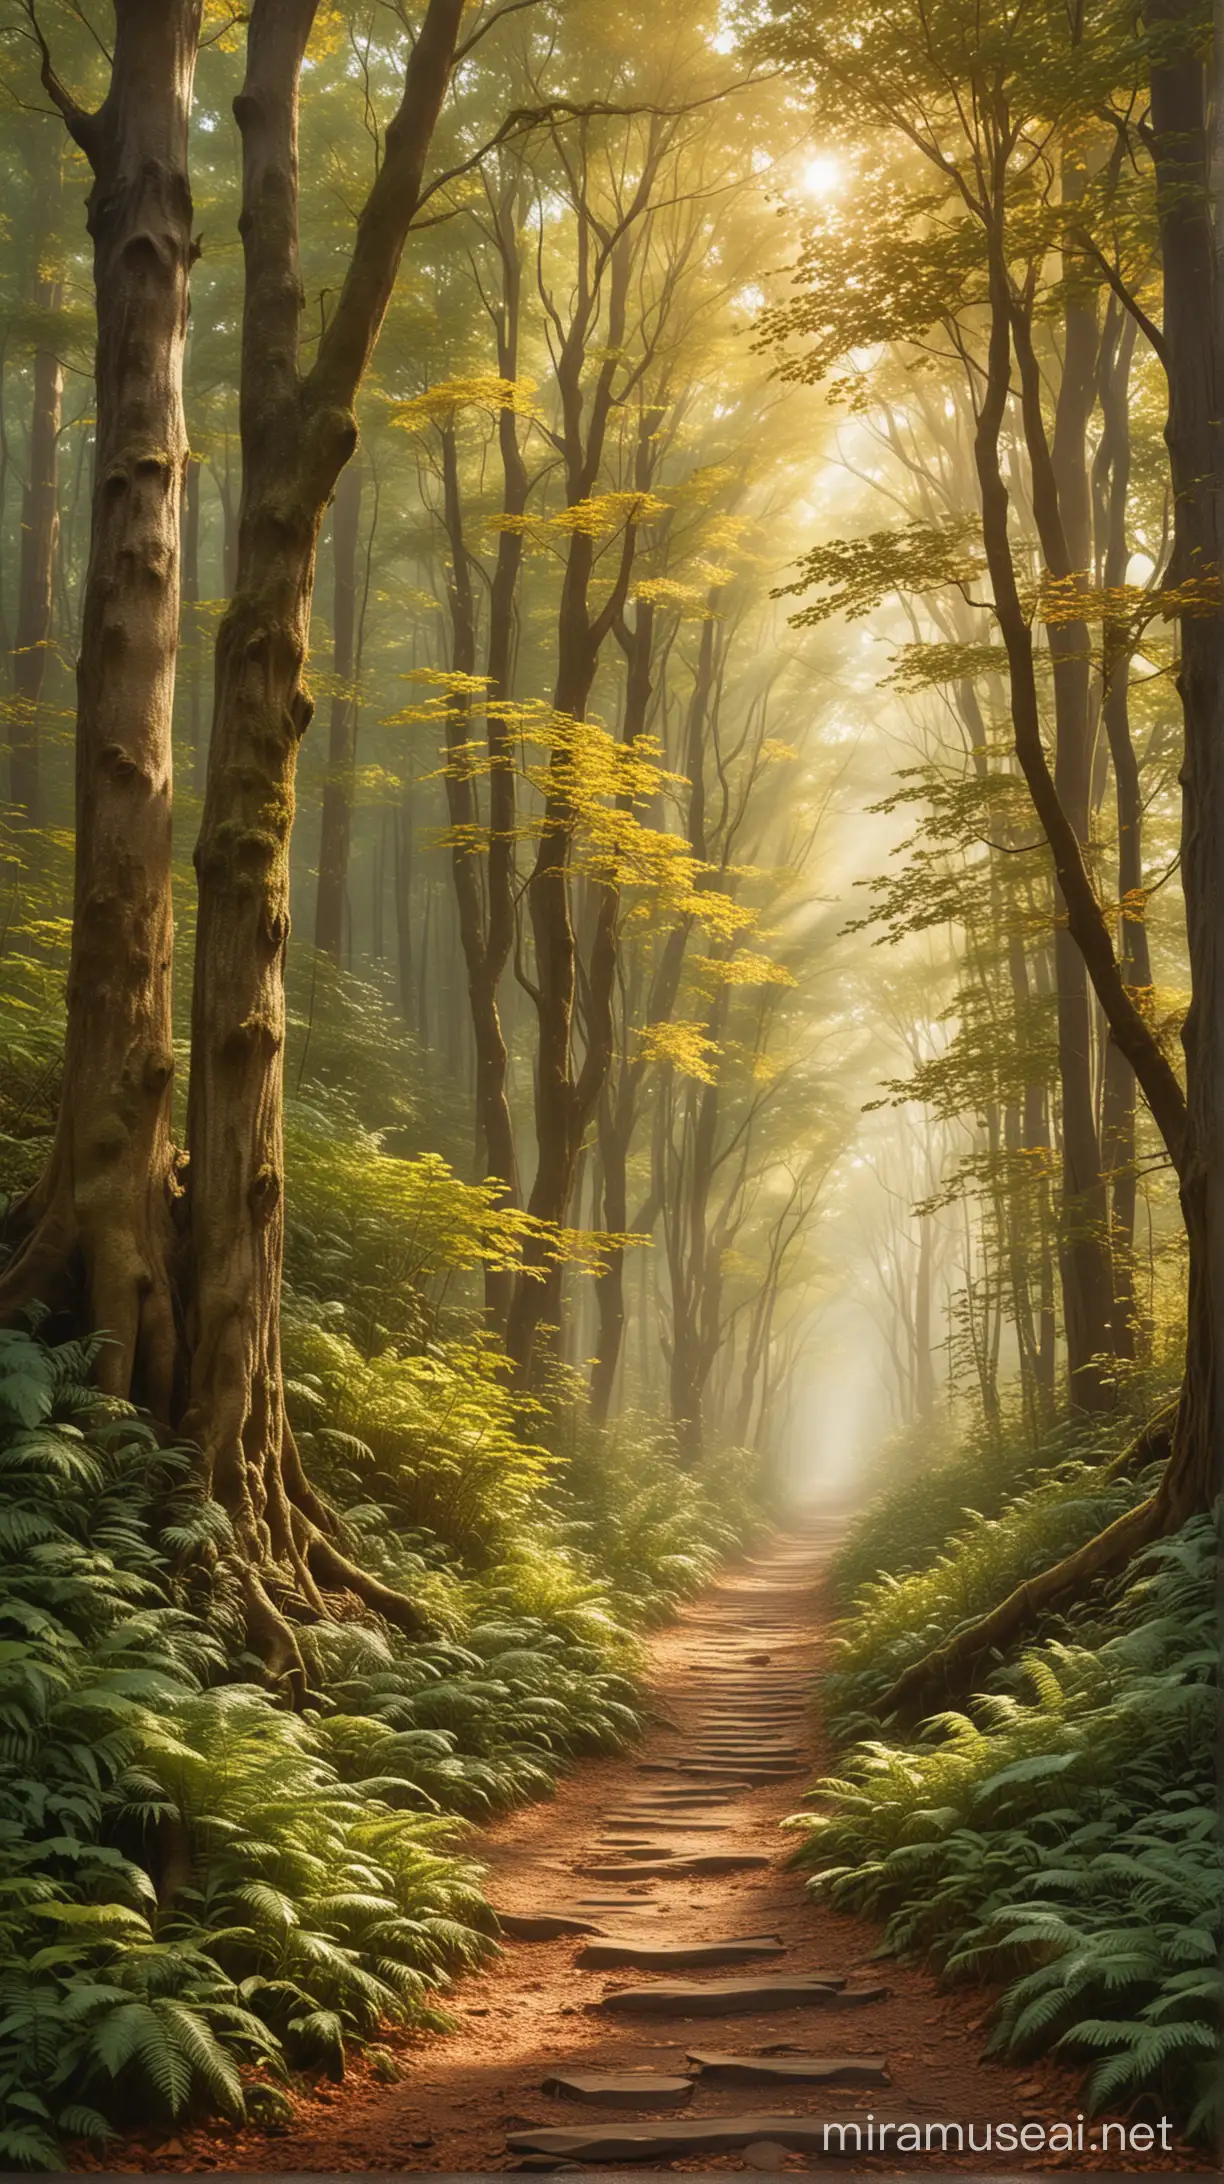 Enchanted Forest Pathway with Towering Trees and Misty Atmosphere